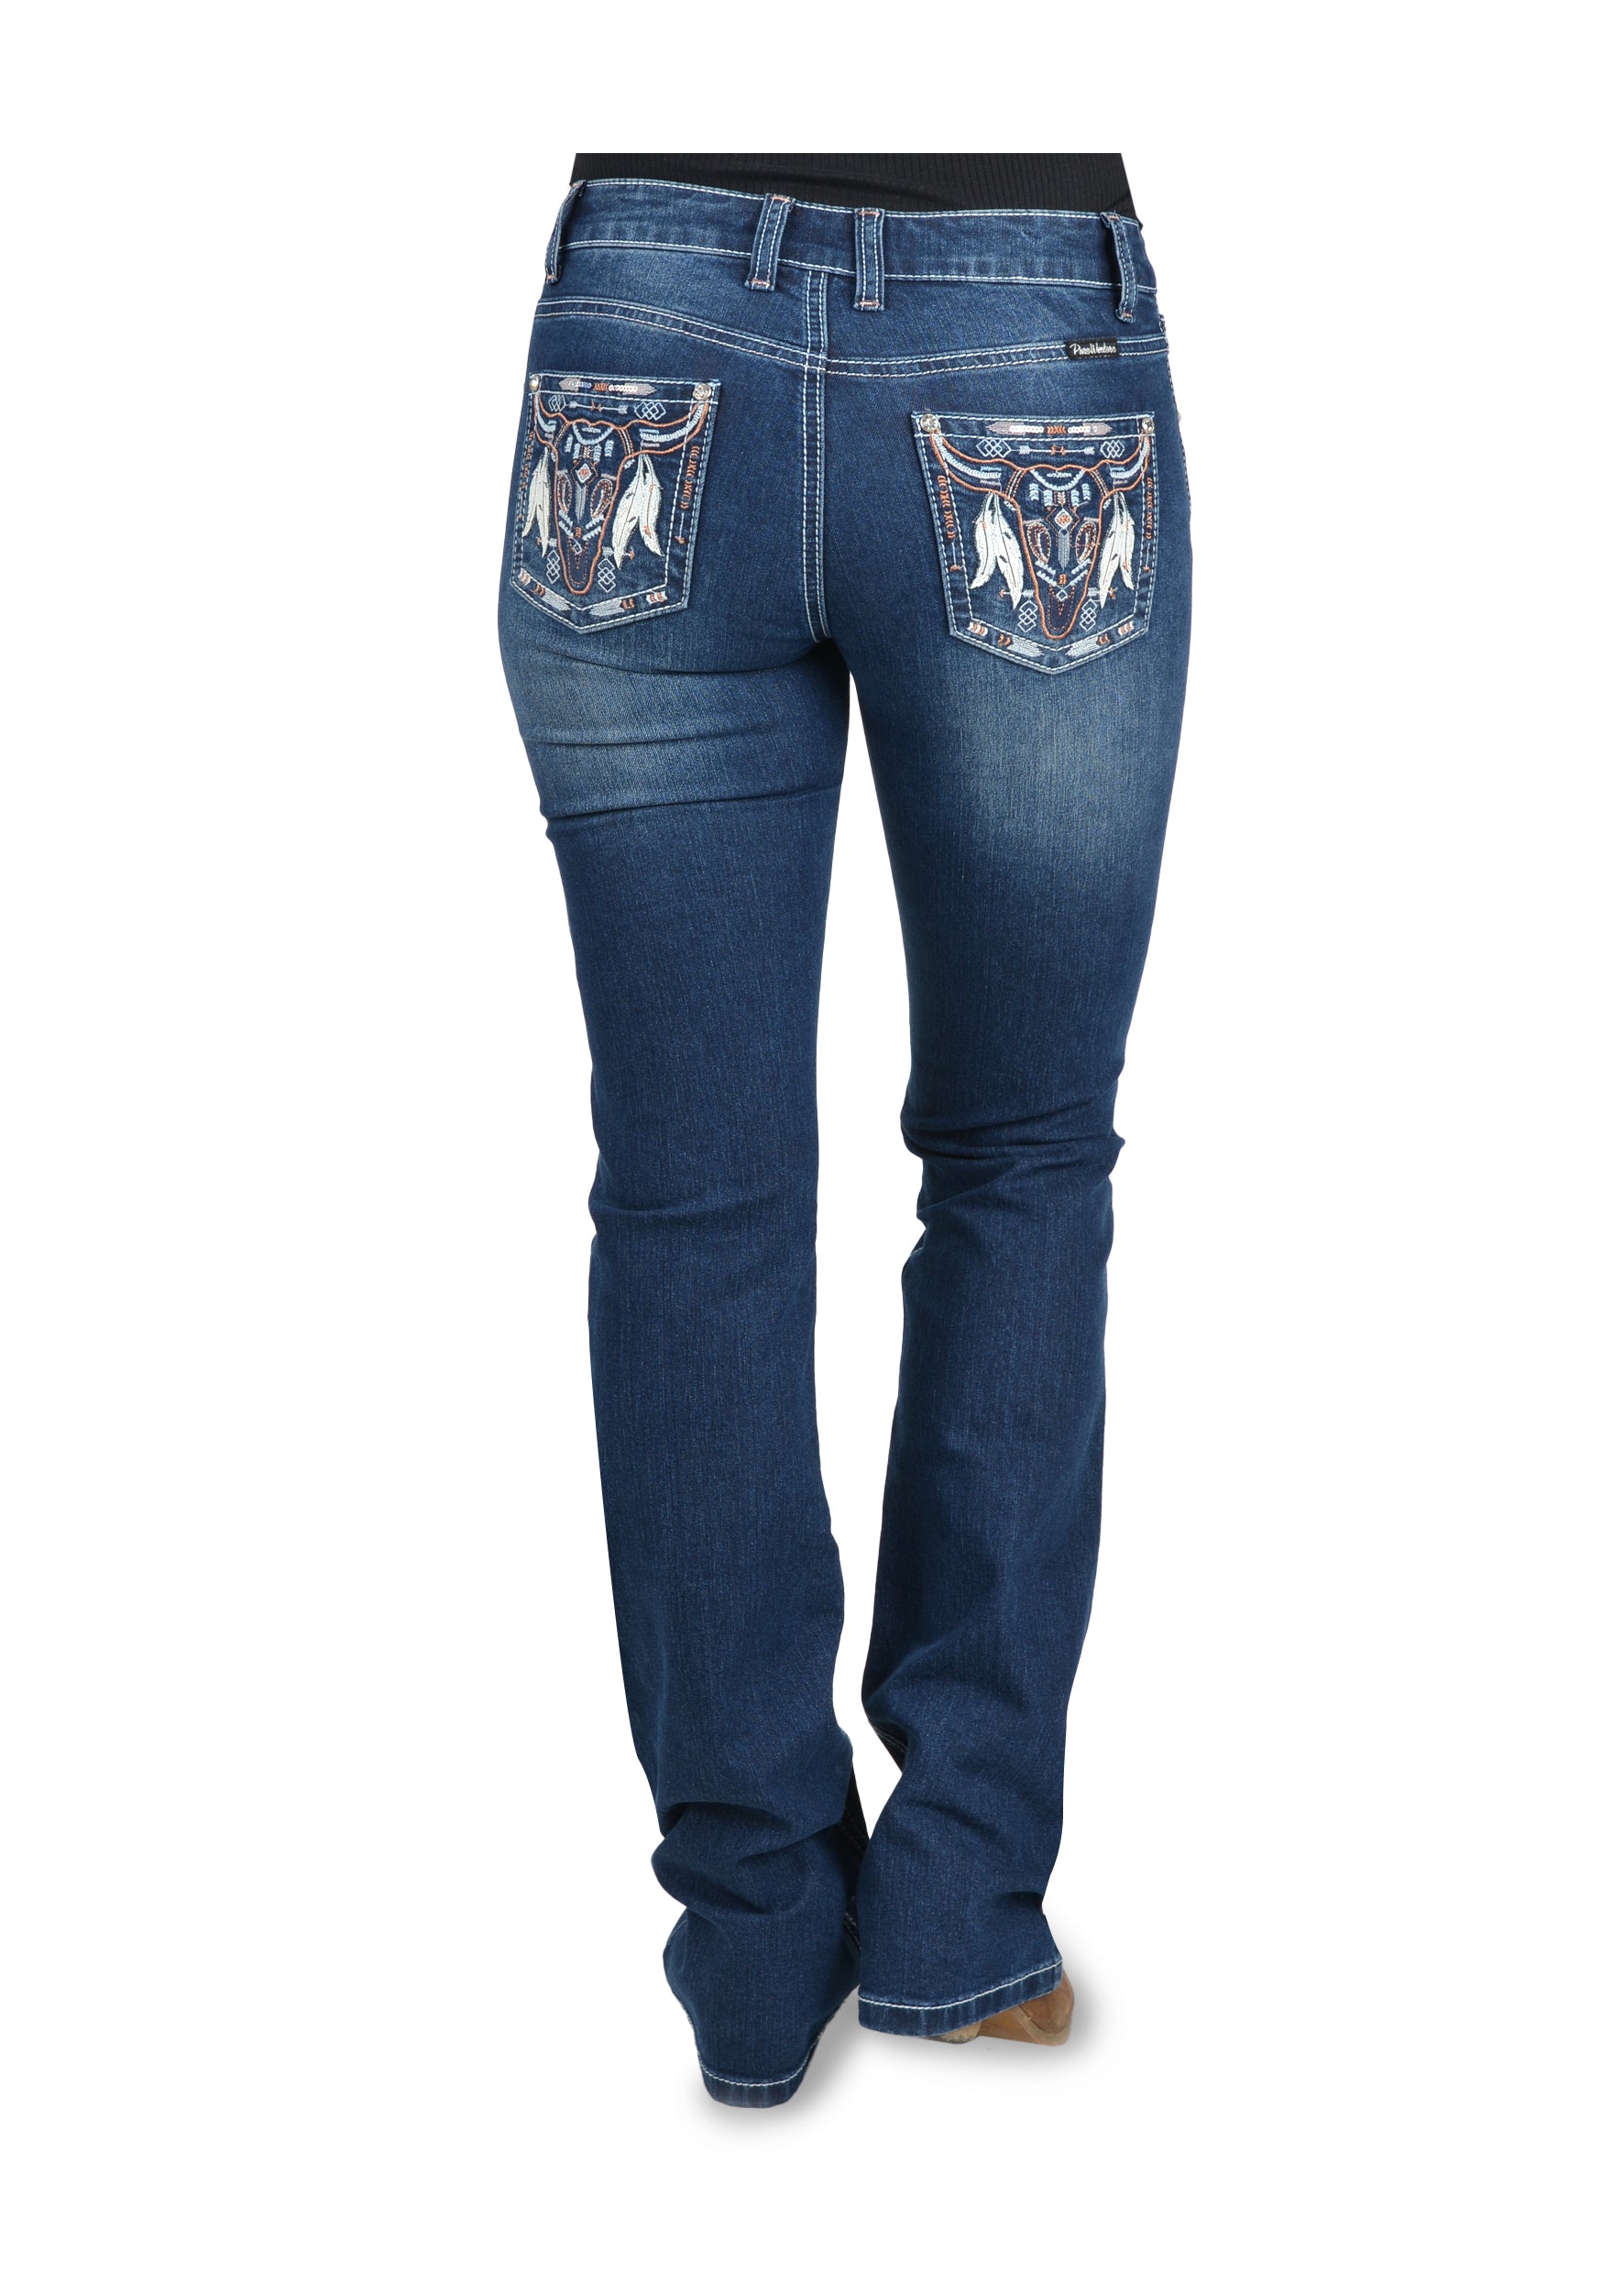 Pure Western Wmns Bettina Relaxed Rider Jean